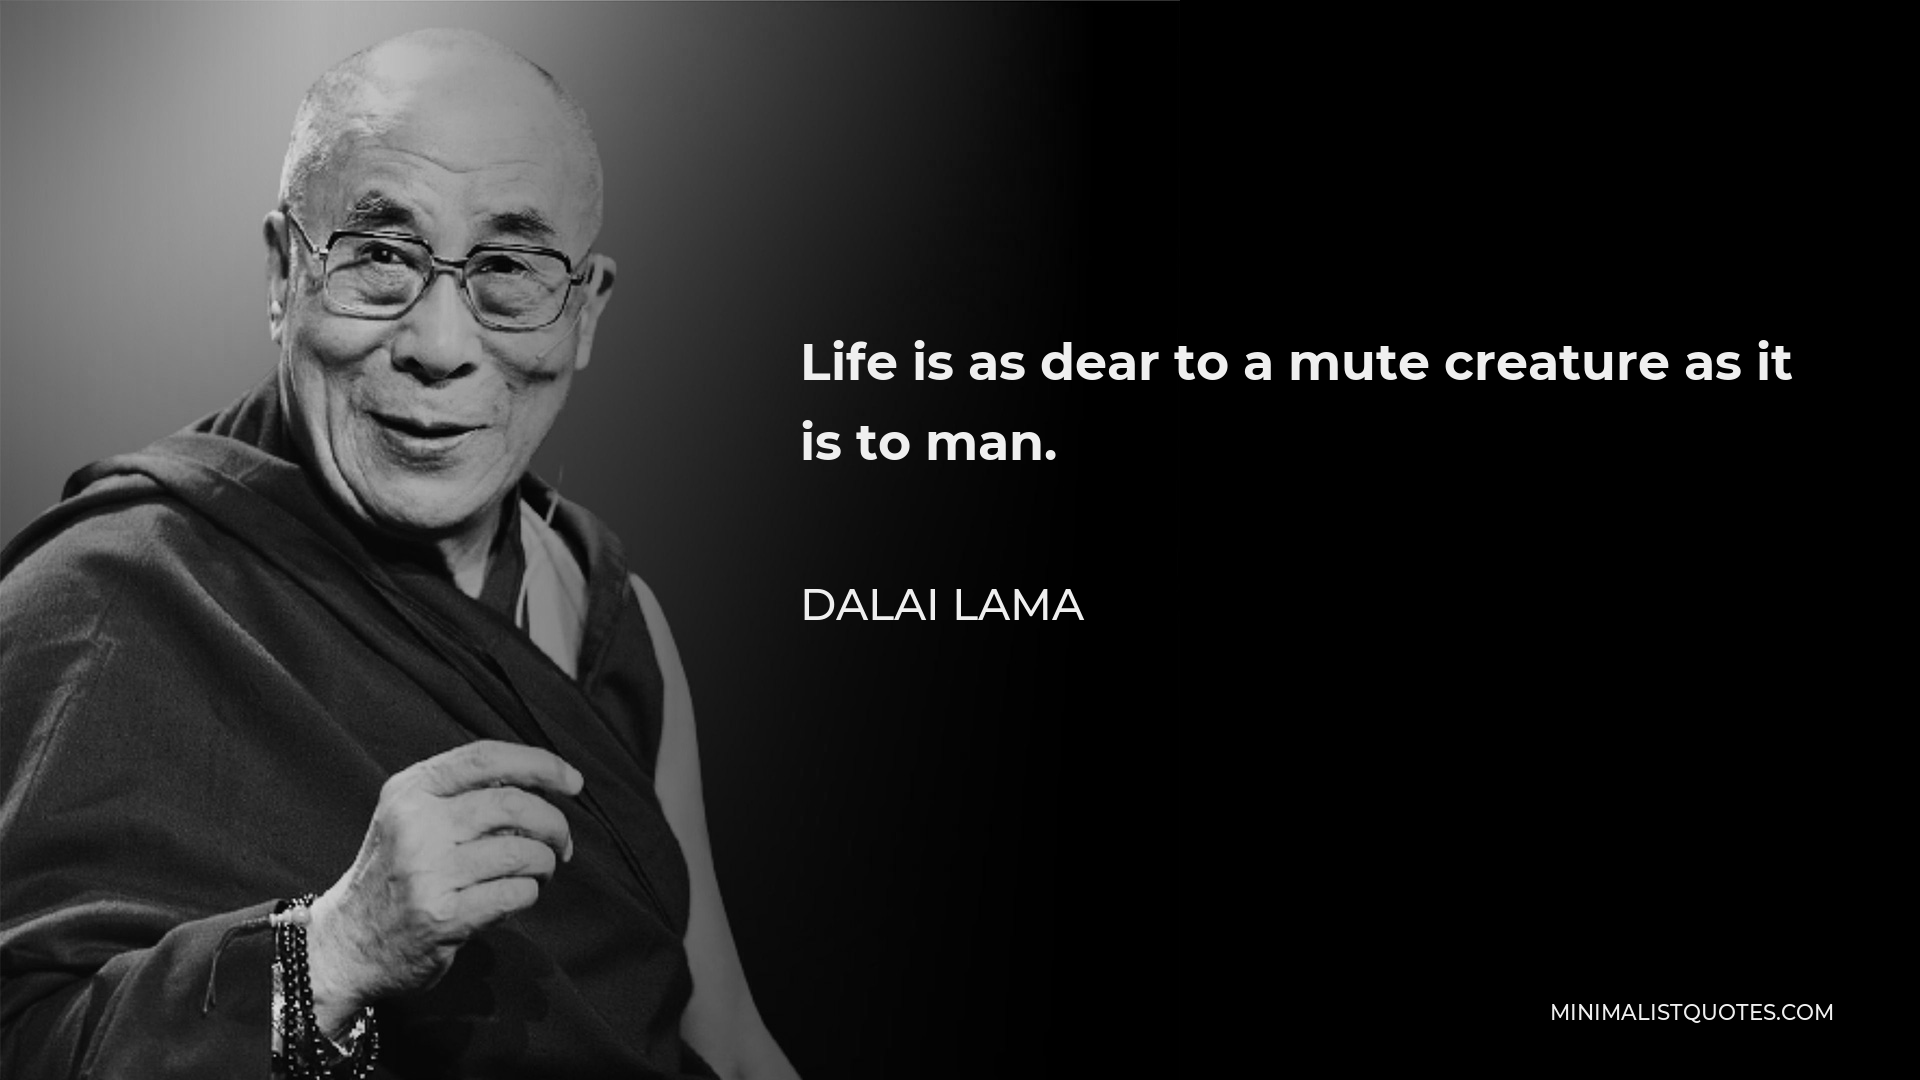 Dalai Lama Quote - Life is as dear to a mute creature as it is to man.